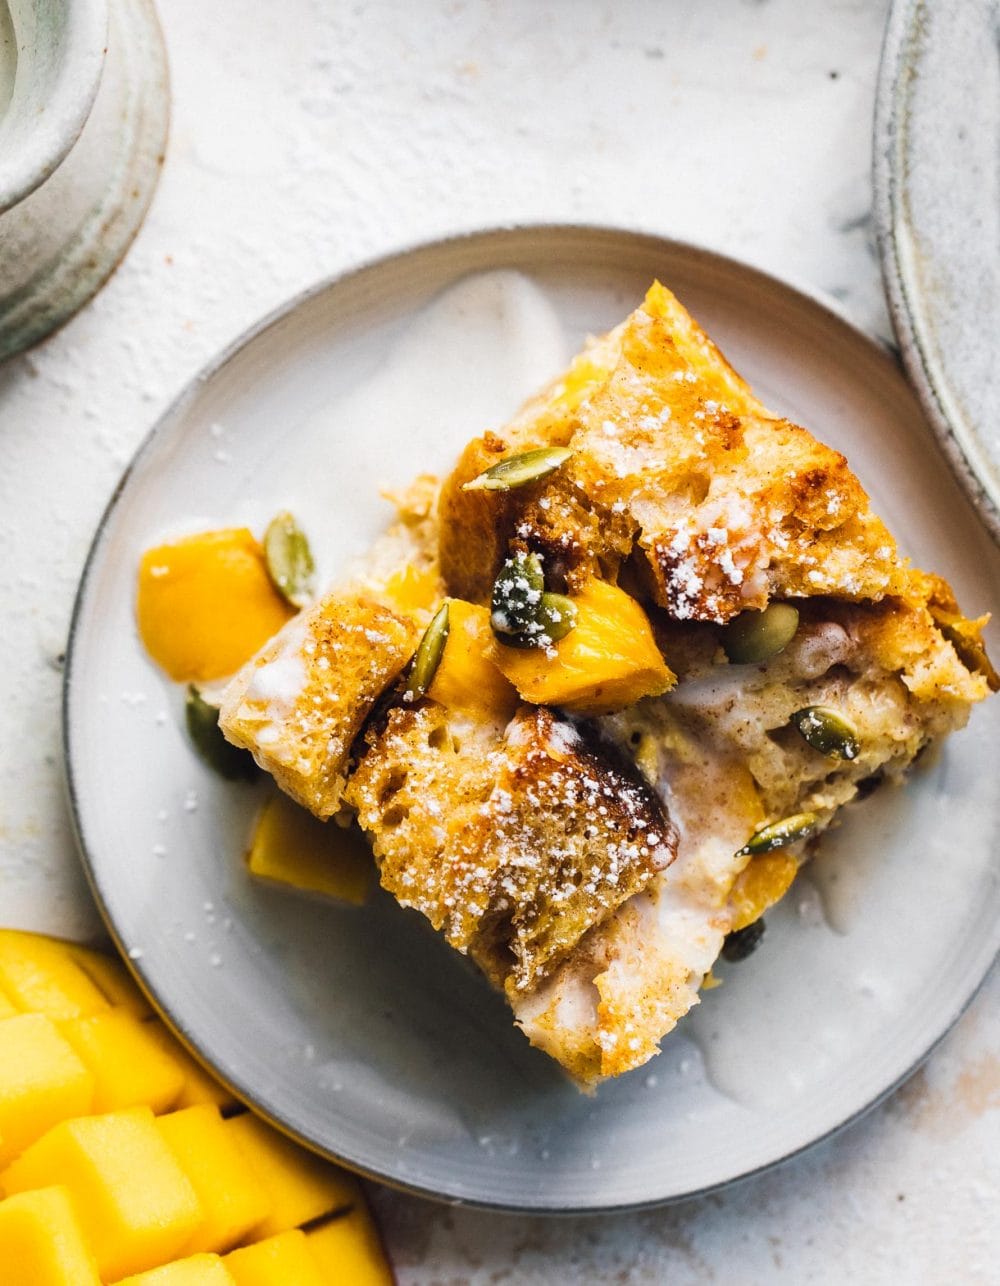 mango bread pudding on a plate